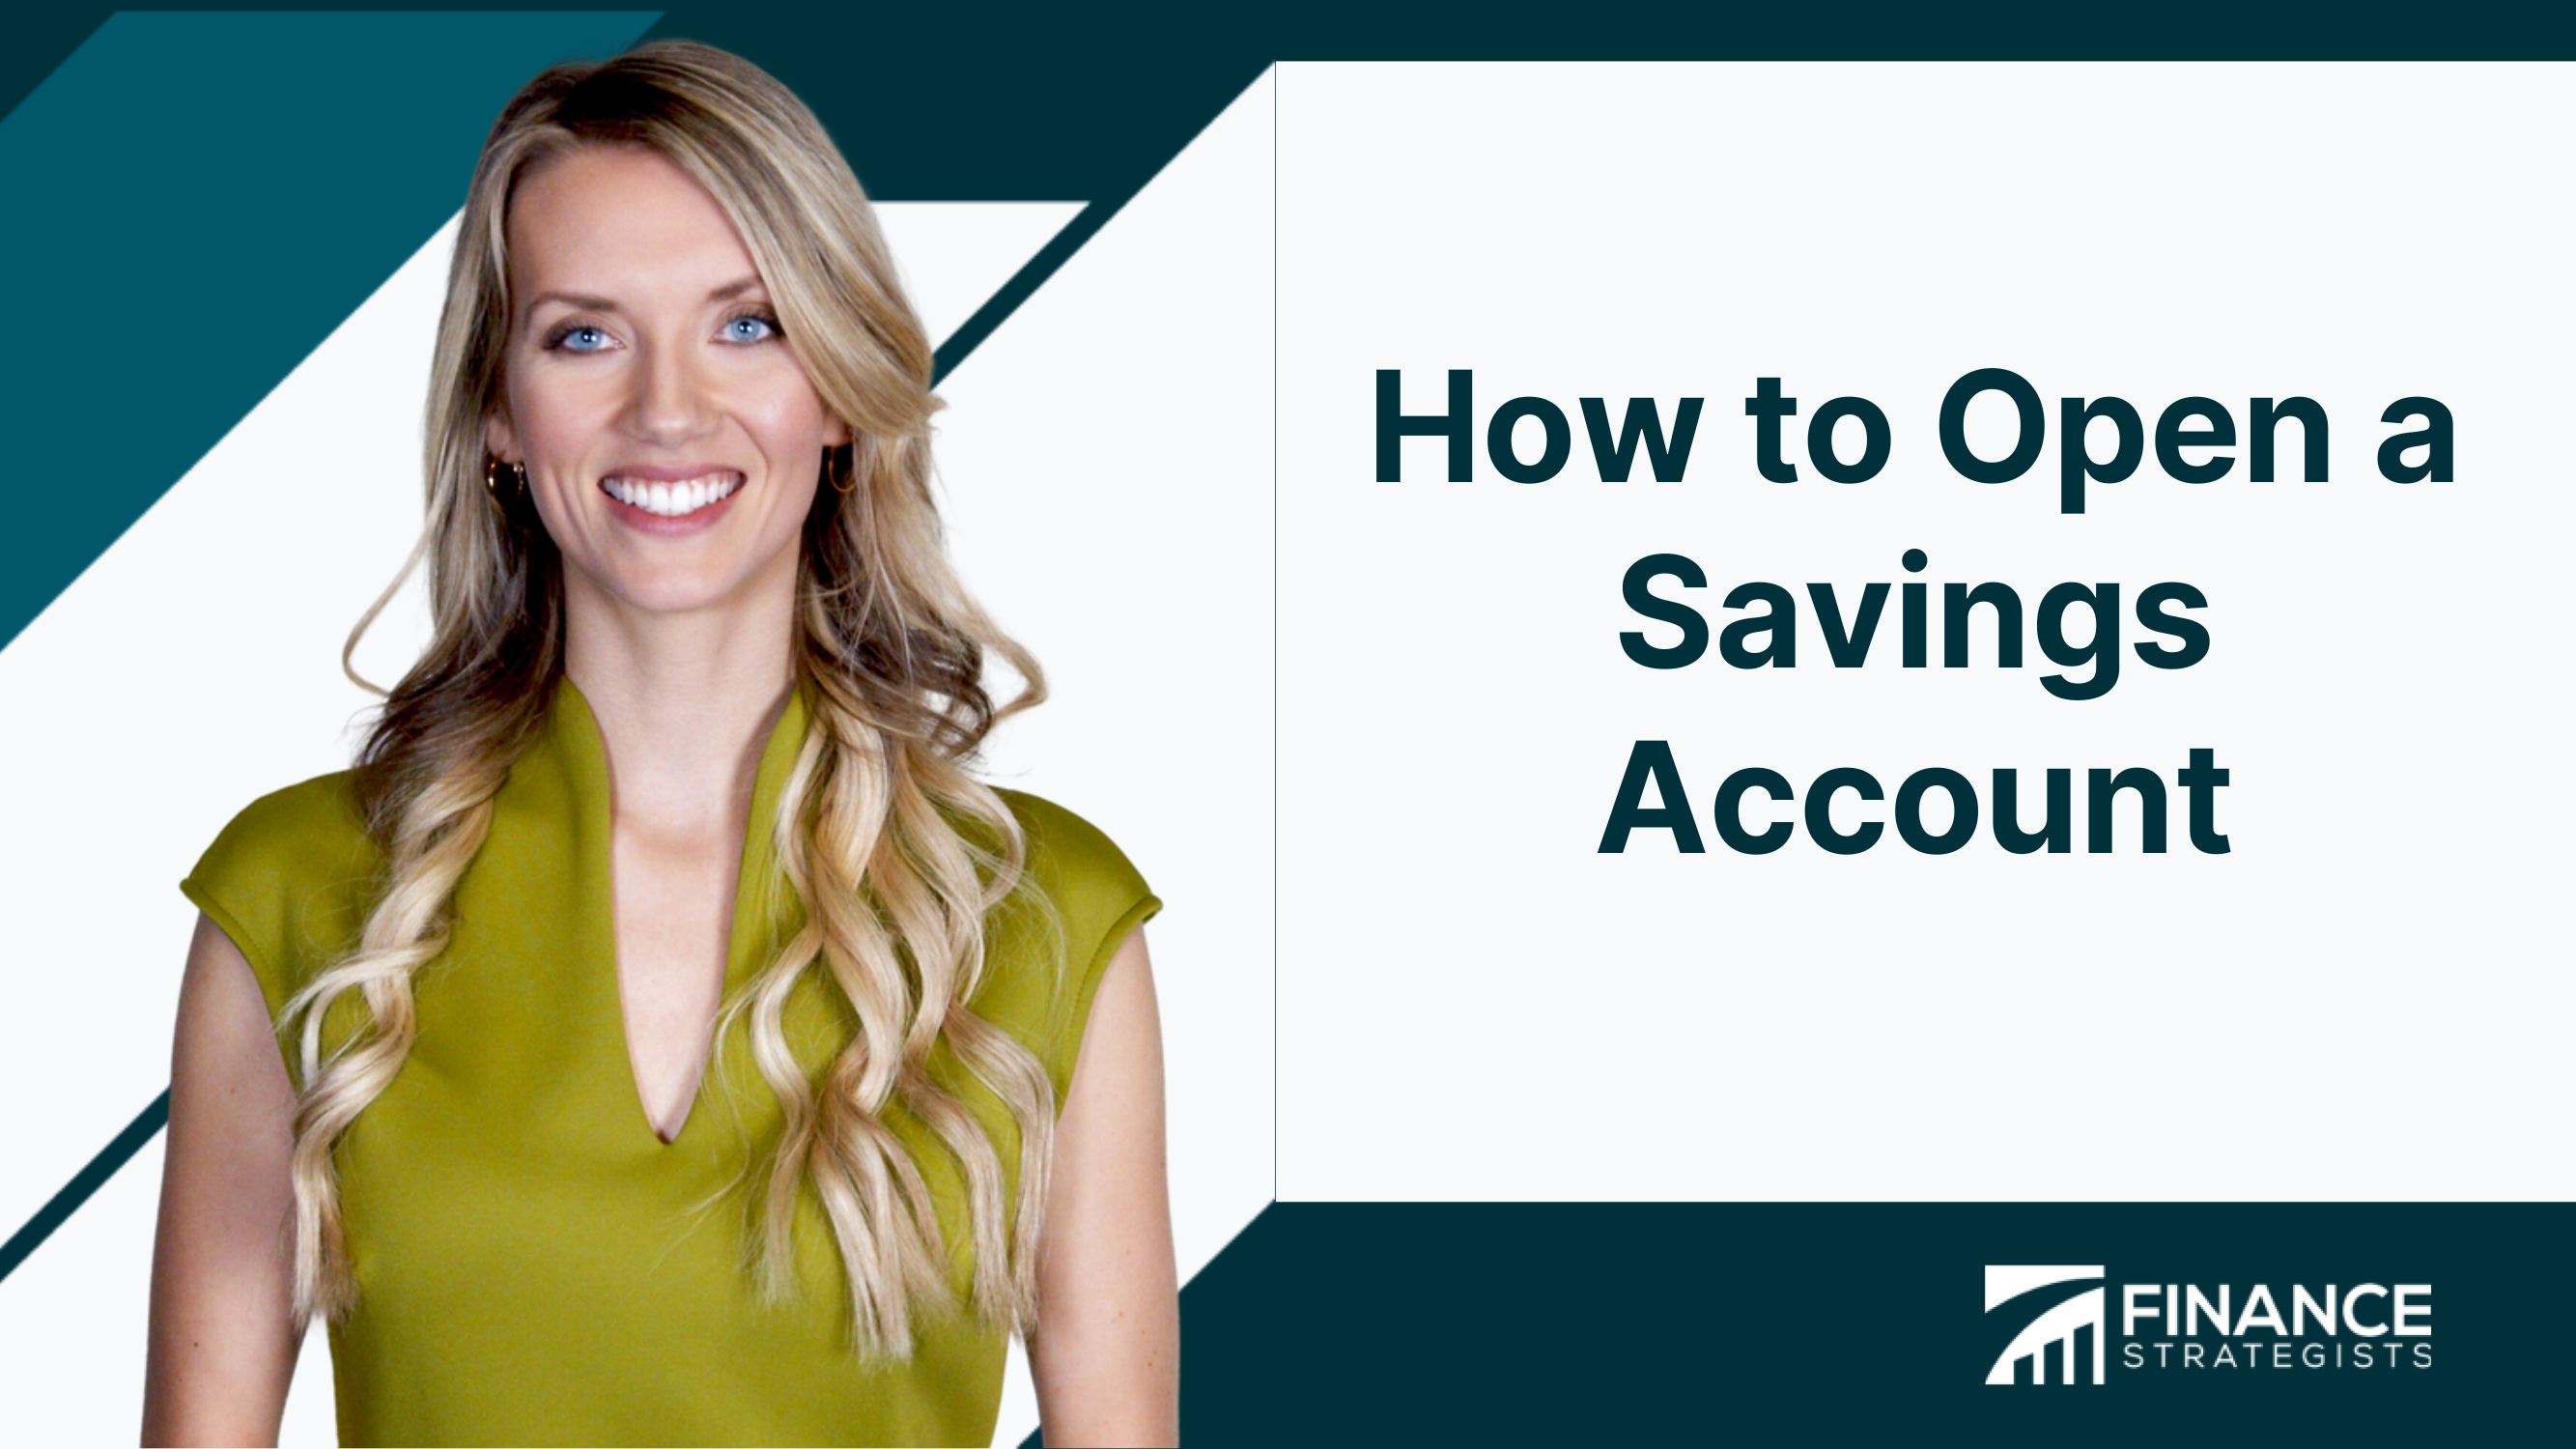 How to Open a Savings Account